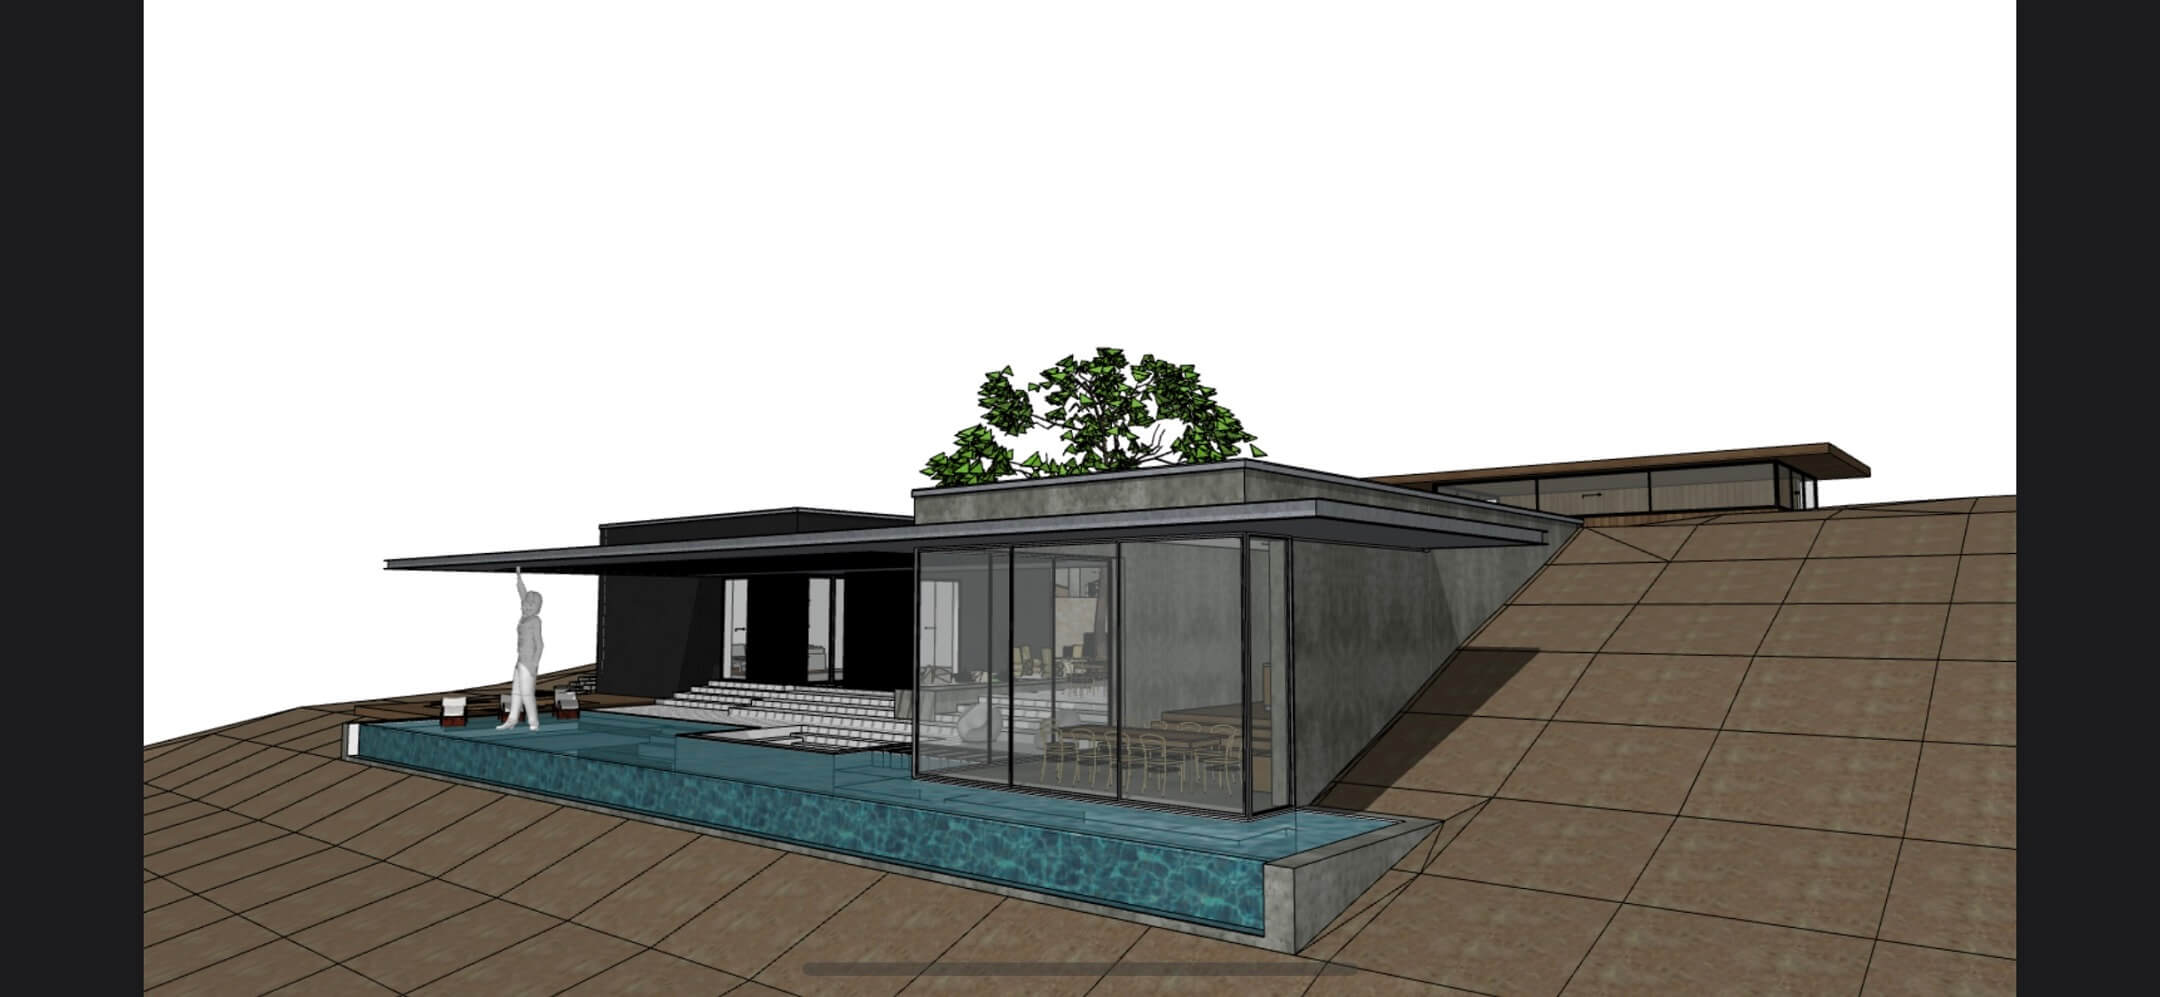 Sketchup Reference for 3D Architectural Visualization